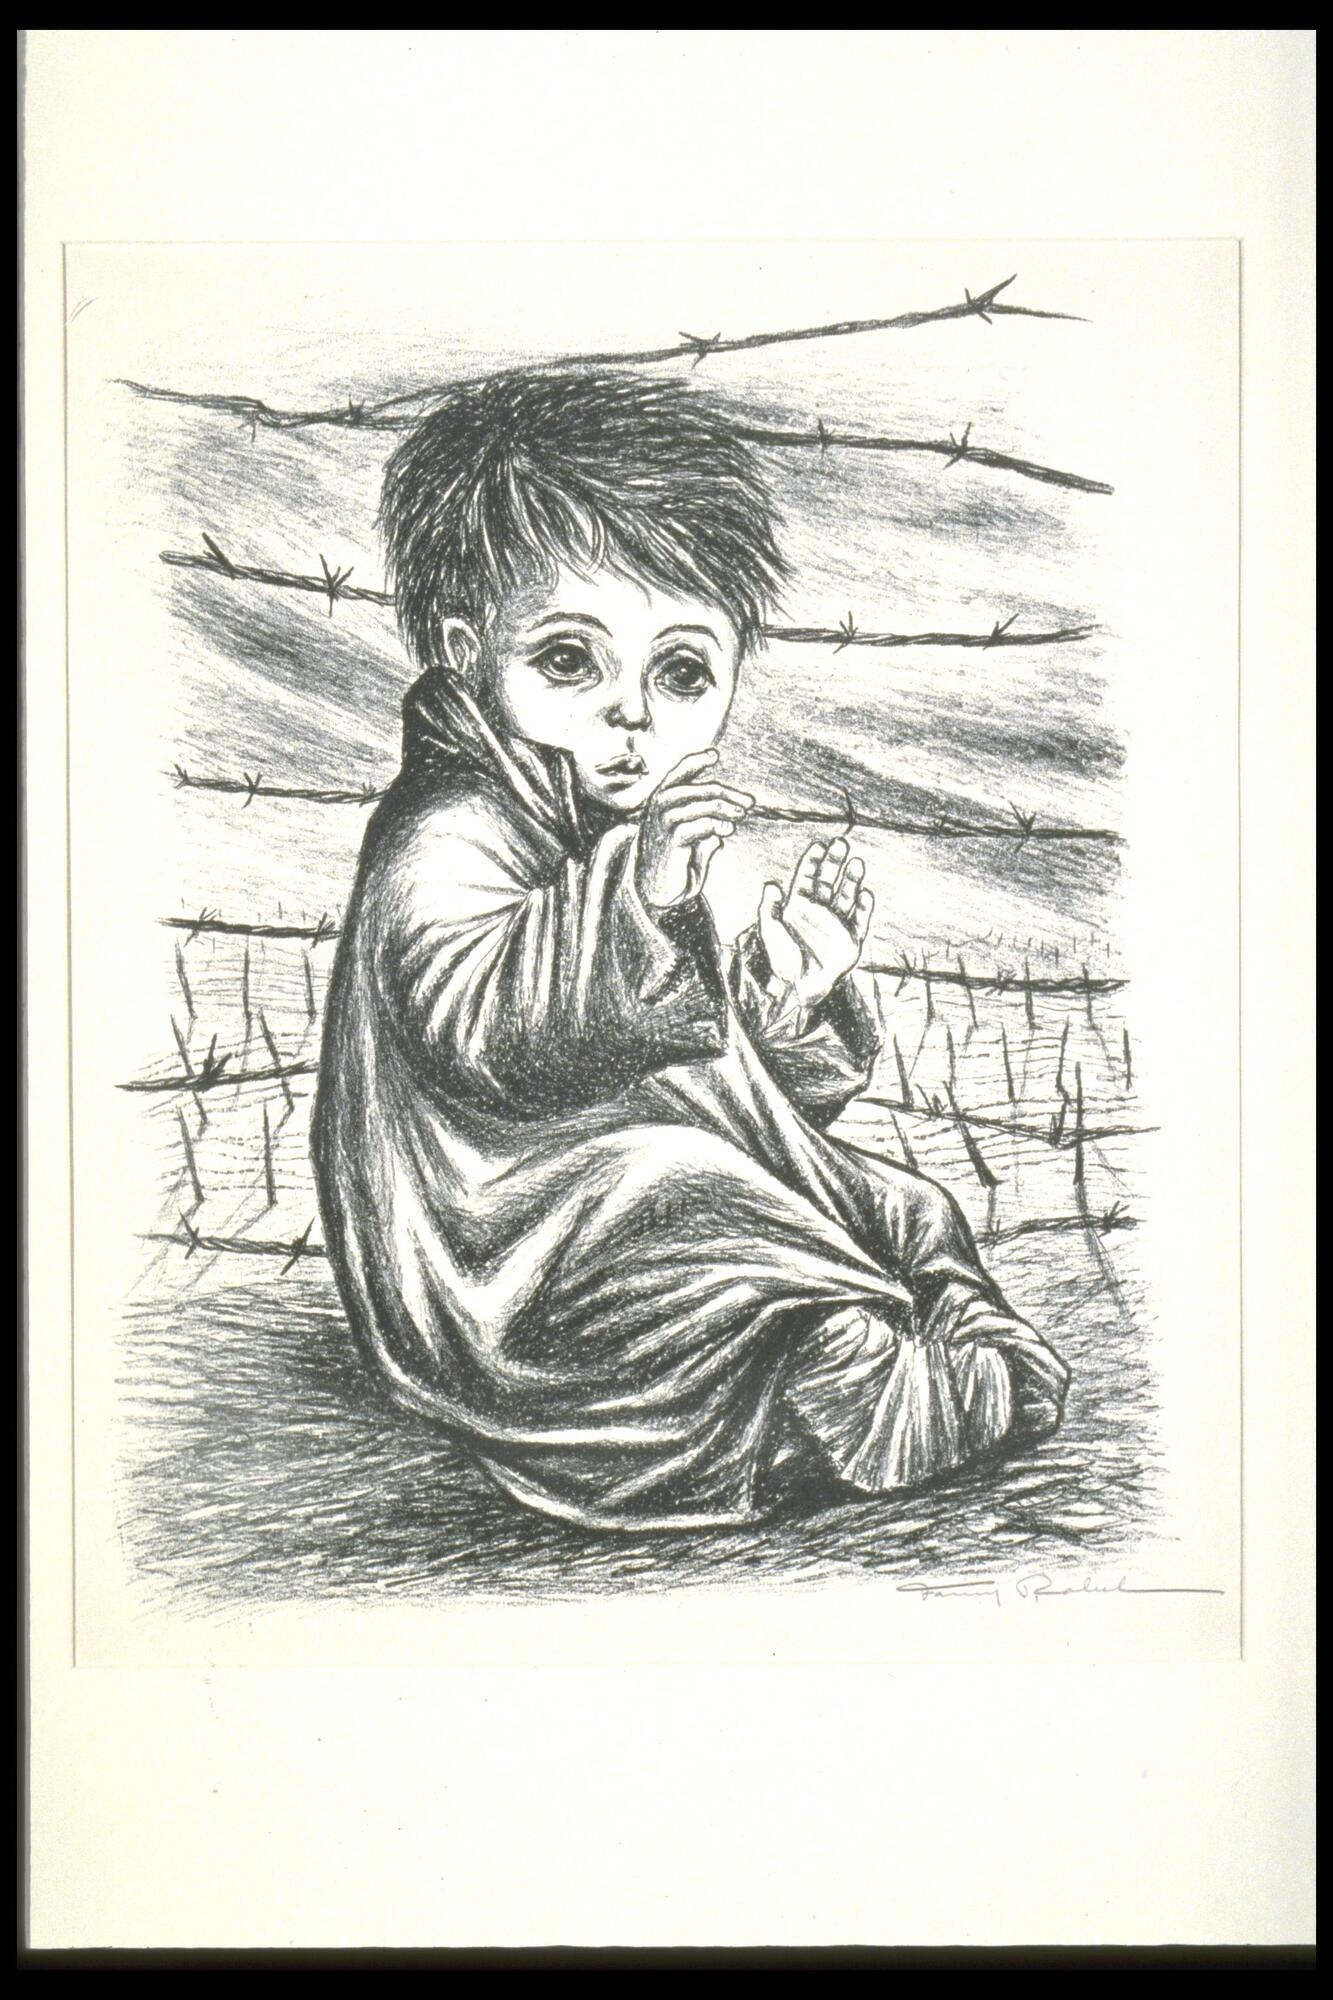 A child sits inside a fence of barbed wire upon the bare dirt ground; beyond the fence lies nothing but burnt tree trunks. He is dressed in rags, and his feet are completely bandaged. Eyes sunken and lips pursed, he holds his hands up in a surrender-like state. It is implied by the title that this child is Jewish and is most likely being depicted inside one of the death camps during the Holocaust.